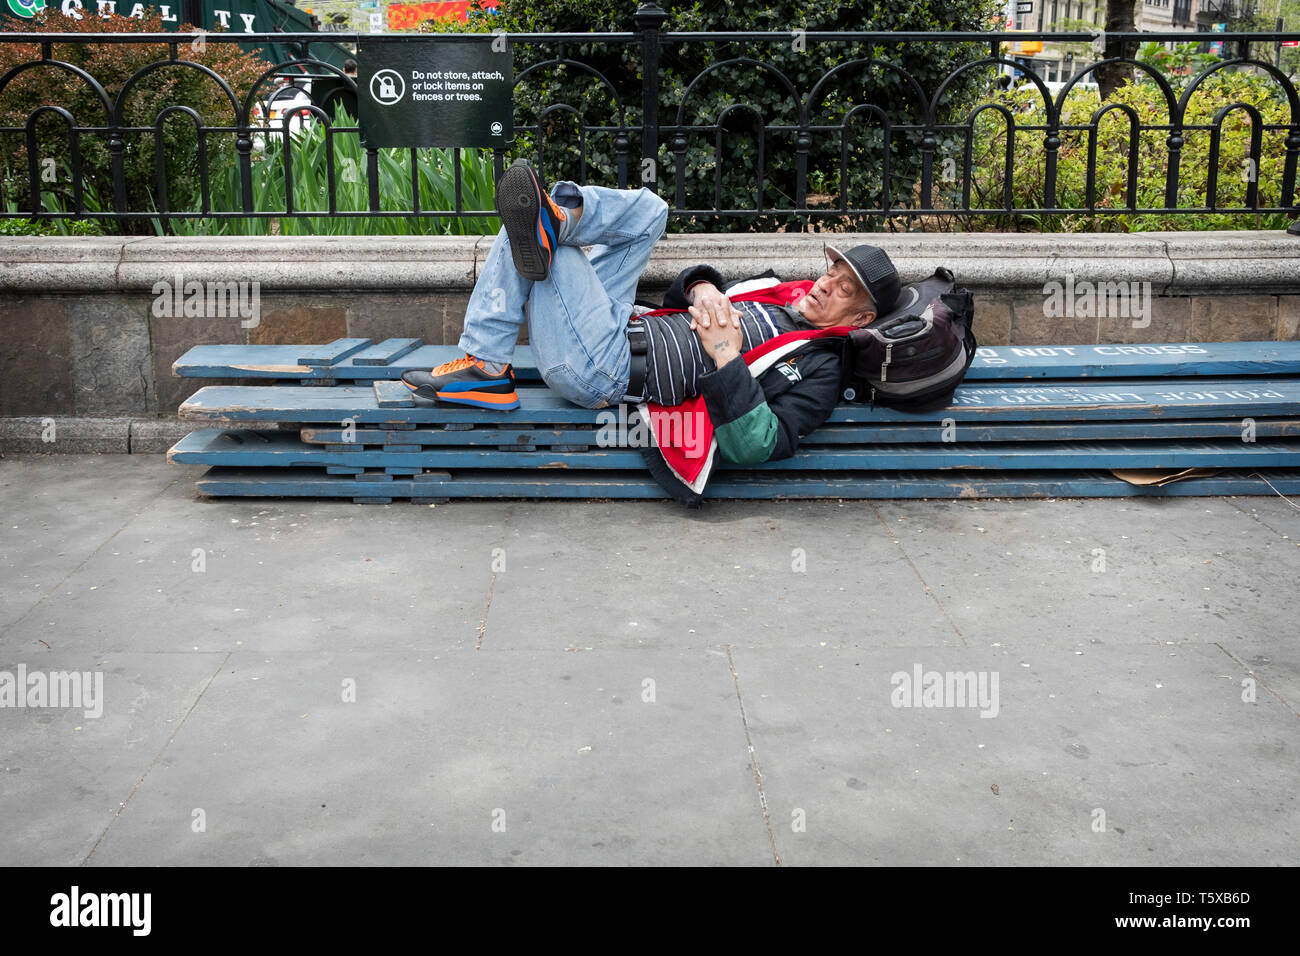 A man having a nap on some wooden planks outsdoors in Union Square Park in lower Manhattan, New York City. Stock Photo